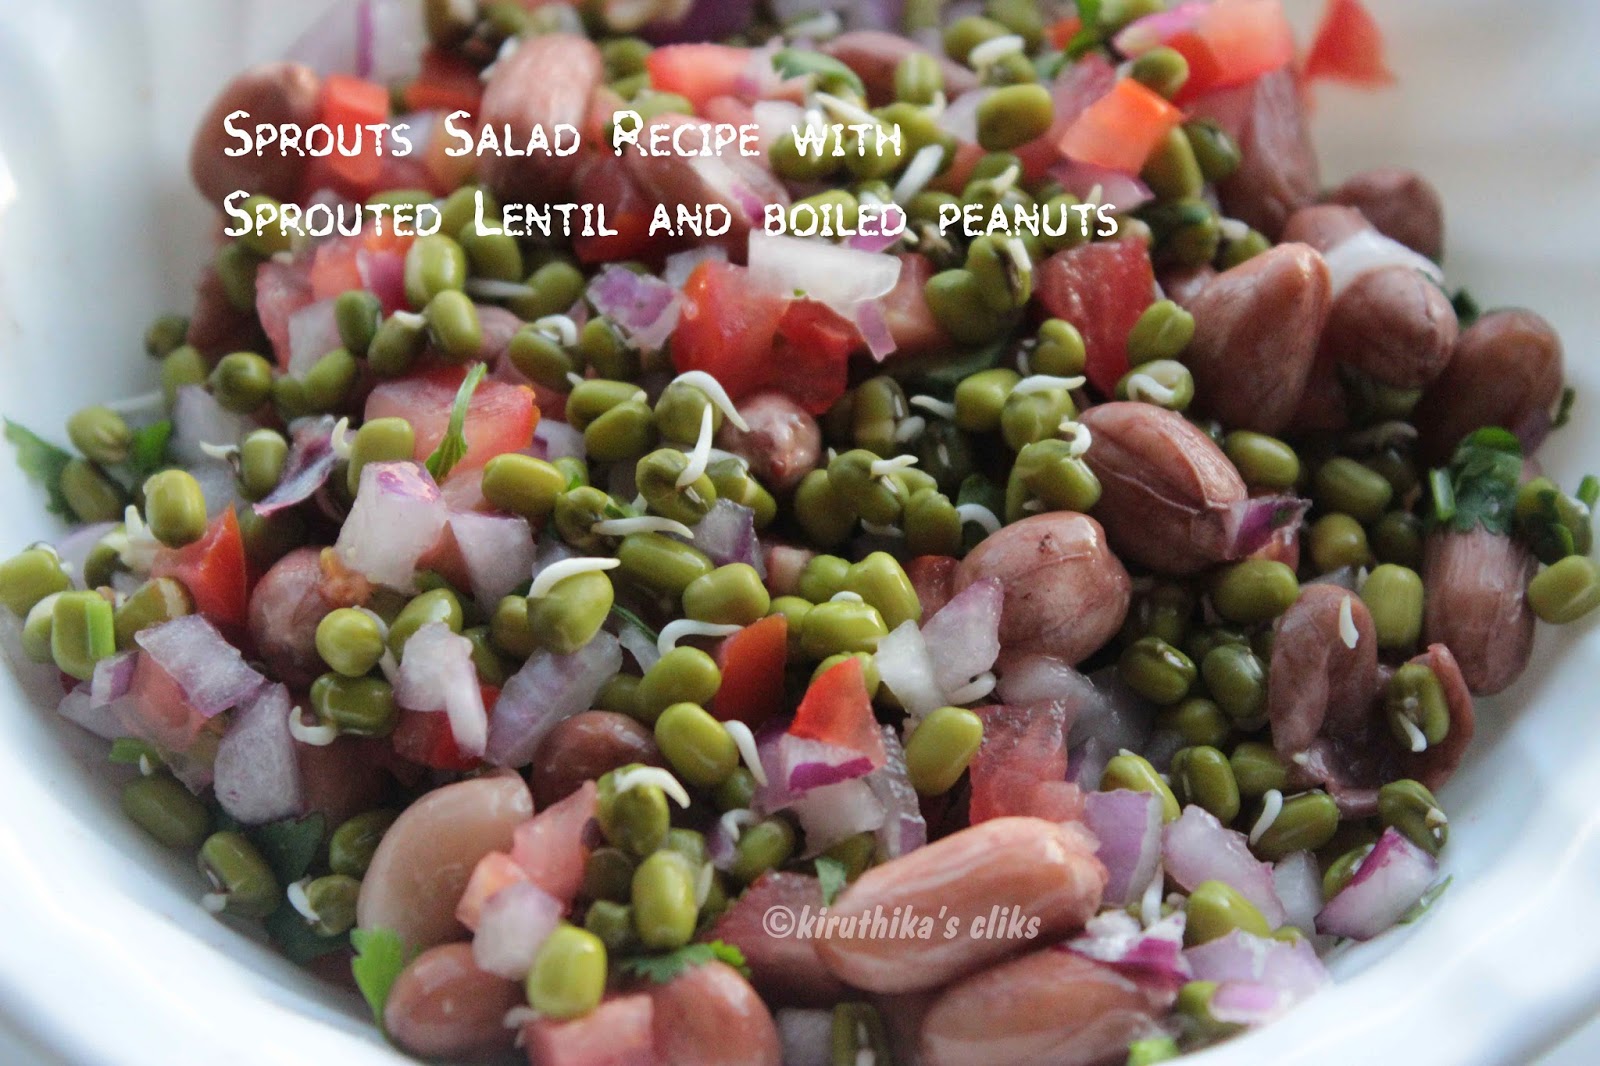 Alternatief Omhoog gaan Pellen Mixed Mocktails: Sprouts Salad Recipe with Sprouted Lentil(moong sprouts)  and boiled peanuts